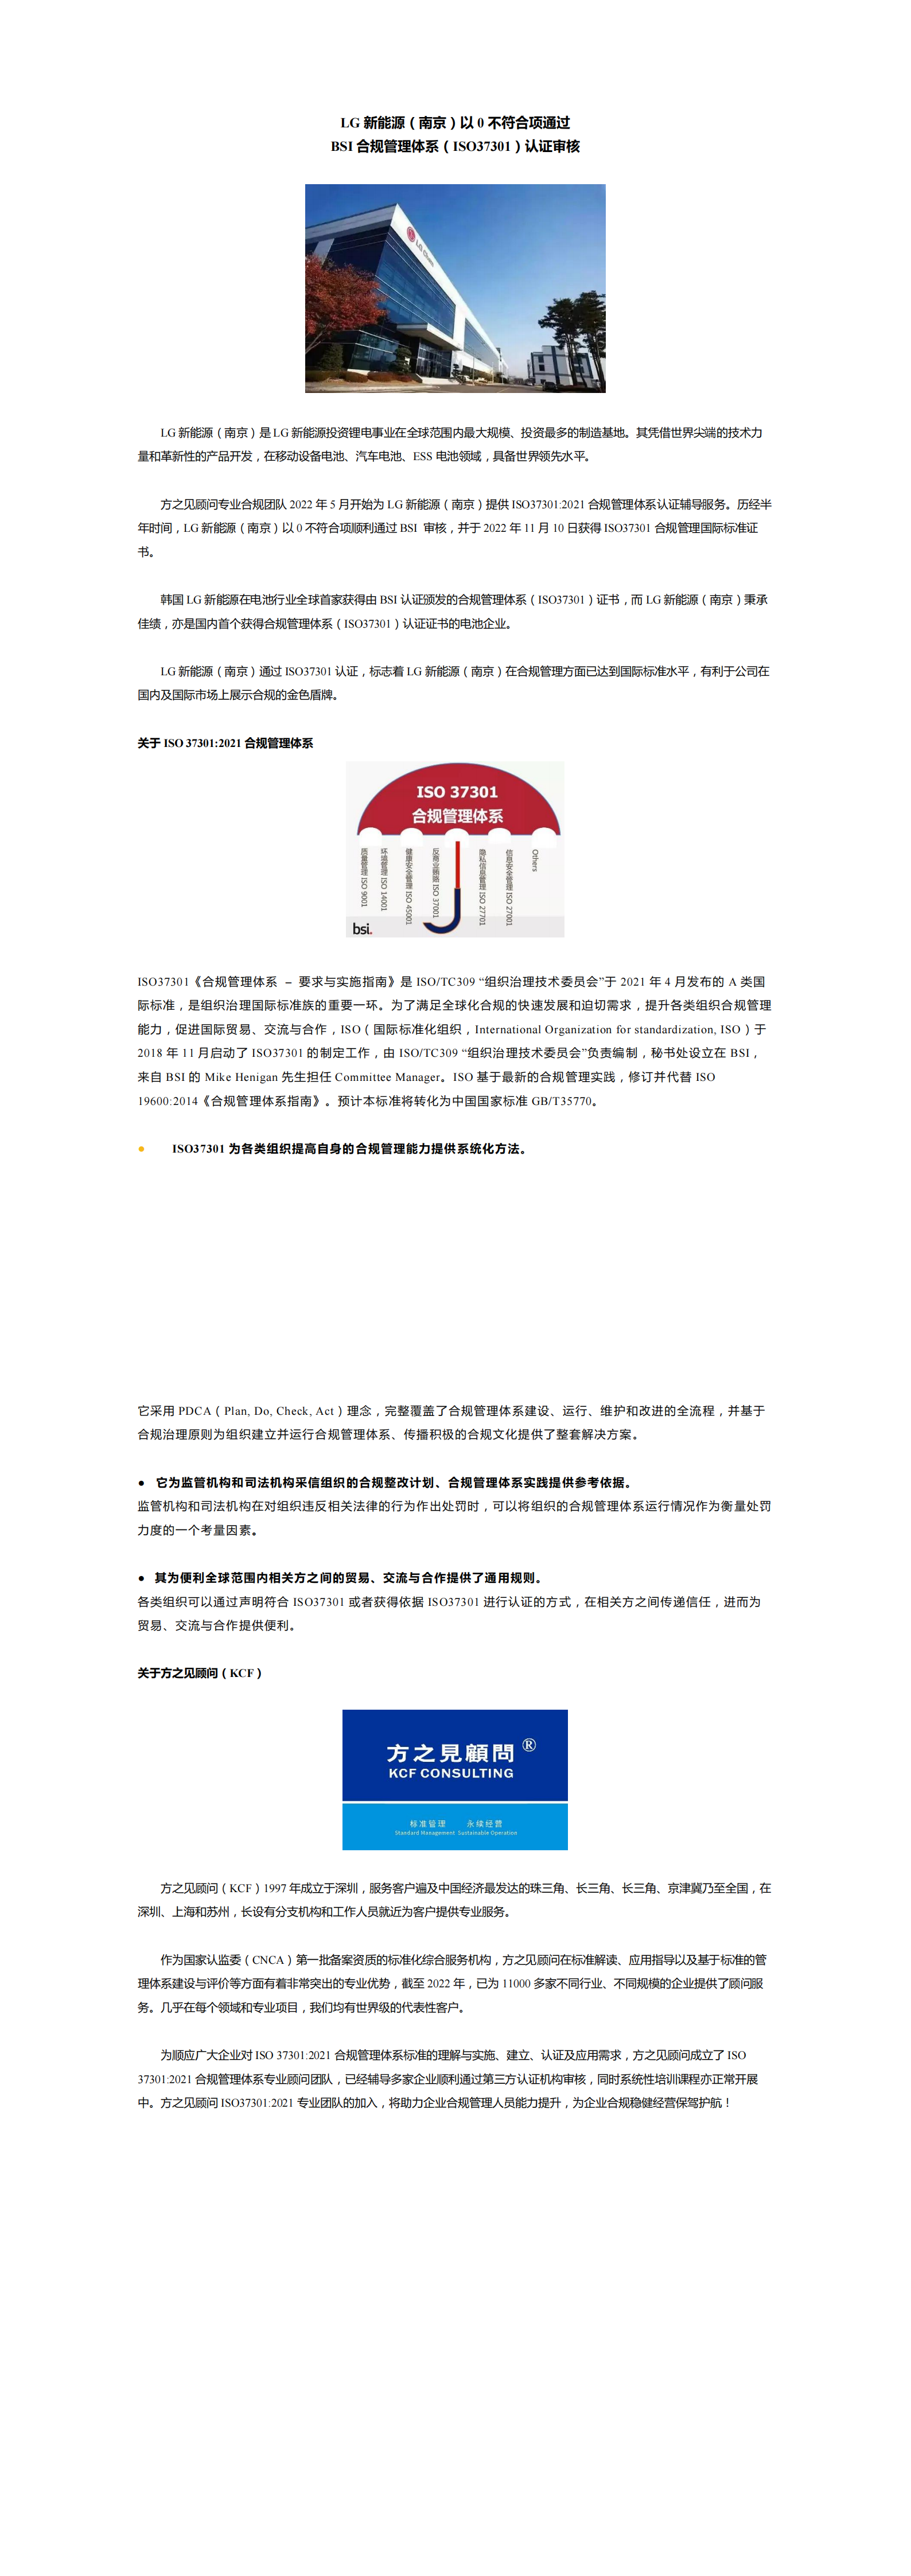 LG新能源（南京）ISO37301.png